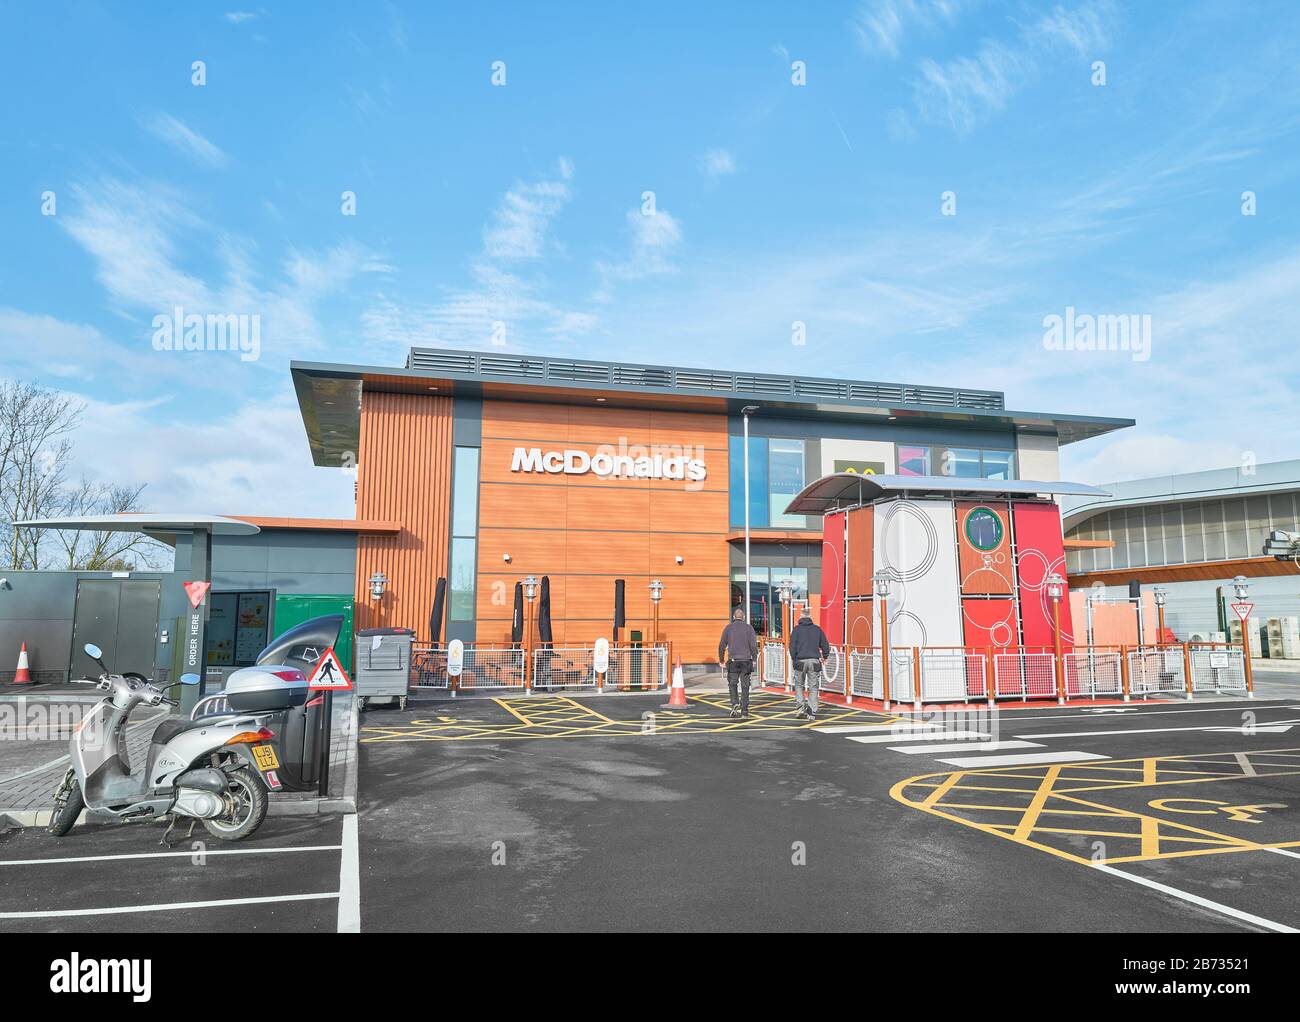 McDonald's restaurant at the southern gateway of Corby, Northamptonshire, England, opened february 2020. Stock Photo